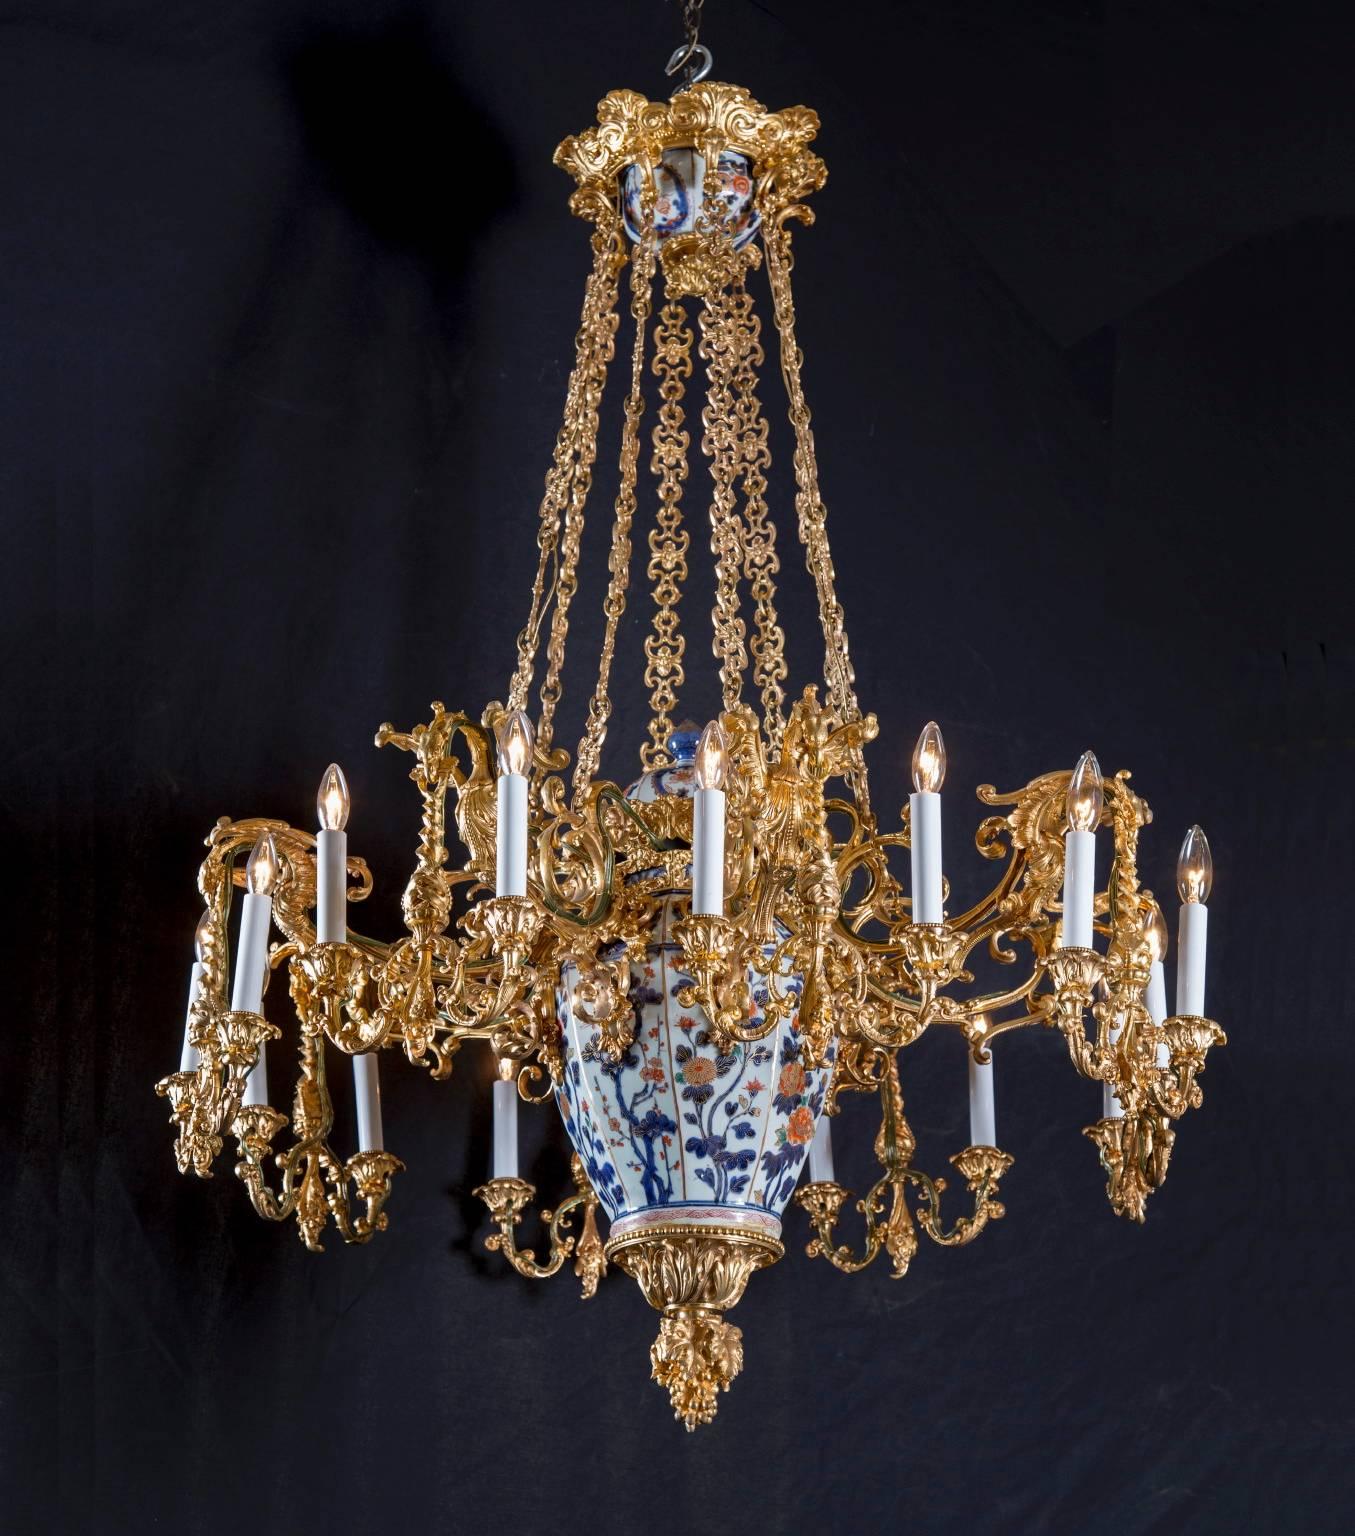 This unique chandelier is made from a fusion of antique Japanese Imari porcelain and French bronze and gold work. 19th century French craftsmen imported the Imari porcelain center, and then modified it by adding bronze arms and chains to turn the